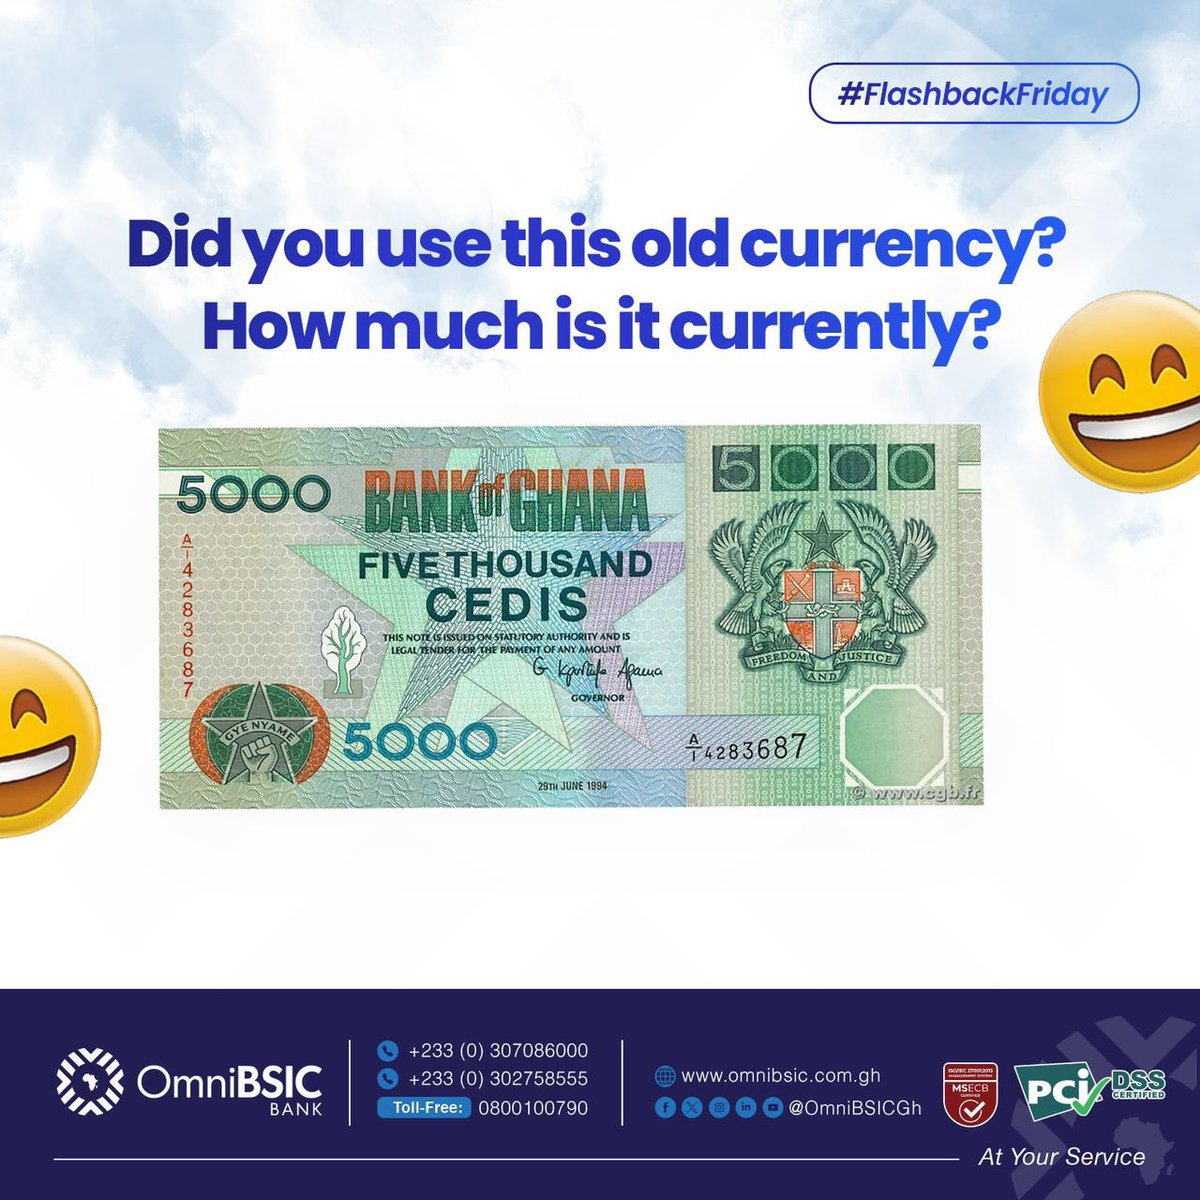 How much is this currently? 🤔 

#OmniBSICBank #AtYourService
omnibsic.com.gh